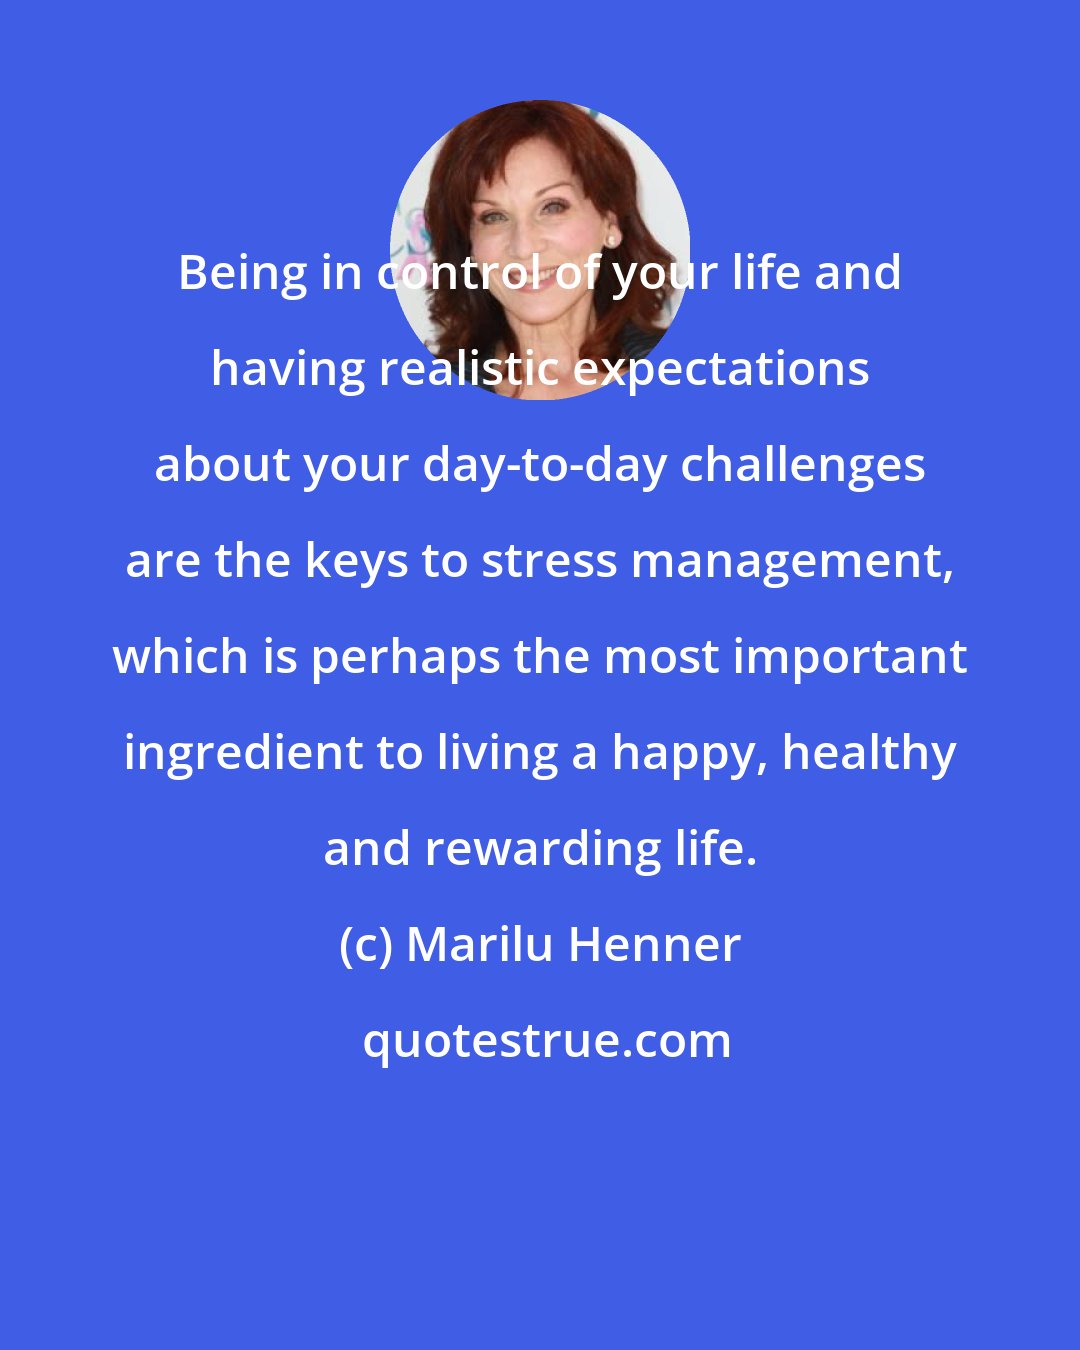 Marilu Henner: Being in control of your life and having realistic expectations about your day-to-day challenges are the keys to stress management, which is perhaps the most important ingredient to living a happy, healthy and rewarding life.